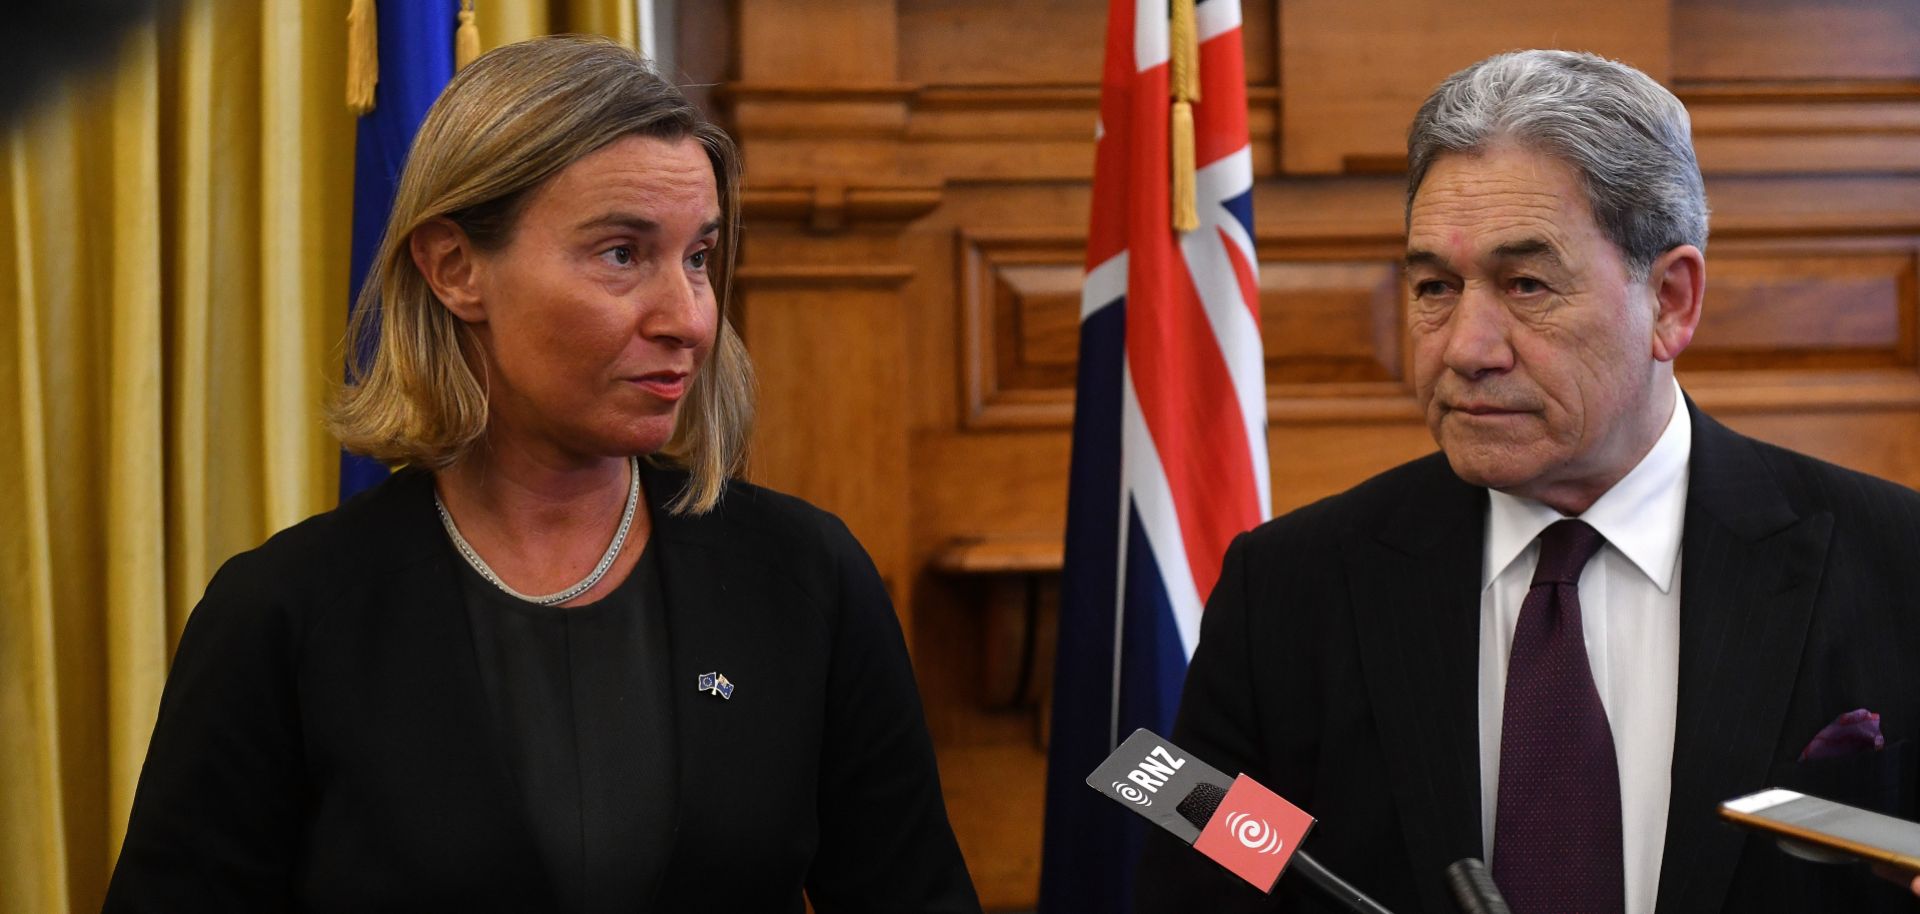 Federica Mogherini (L), head of EU foreign affairs, meets with New Zealand's foreign minister, Winston Peters, during a trip to Wellington on Aug. 7, 2018.